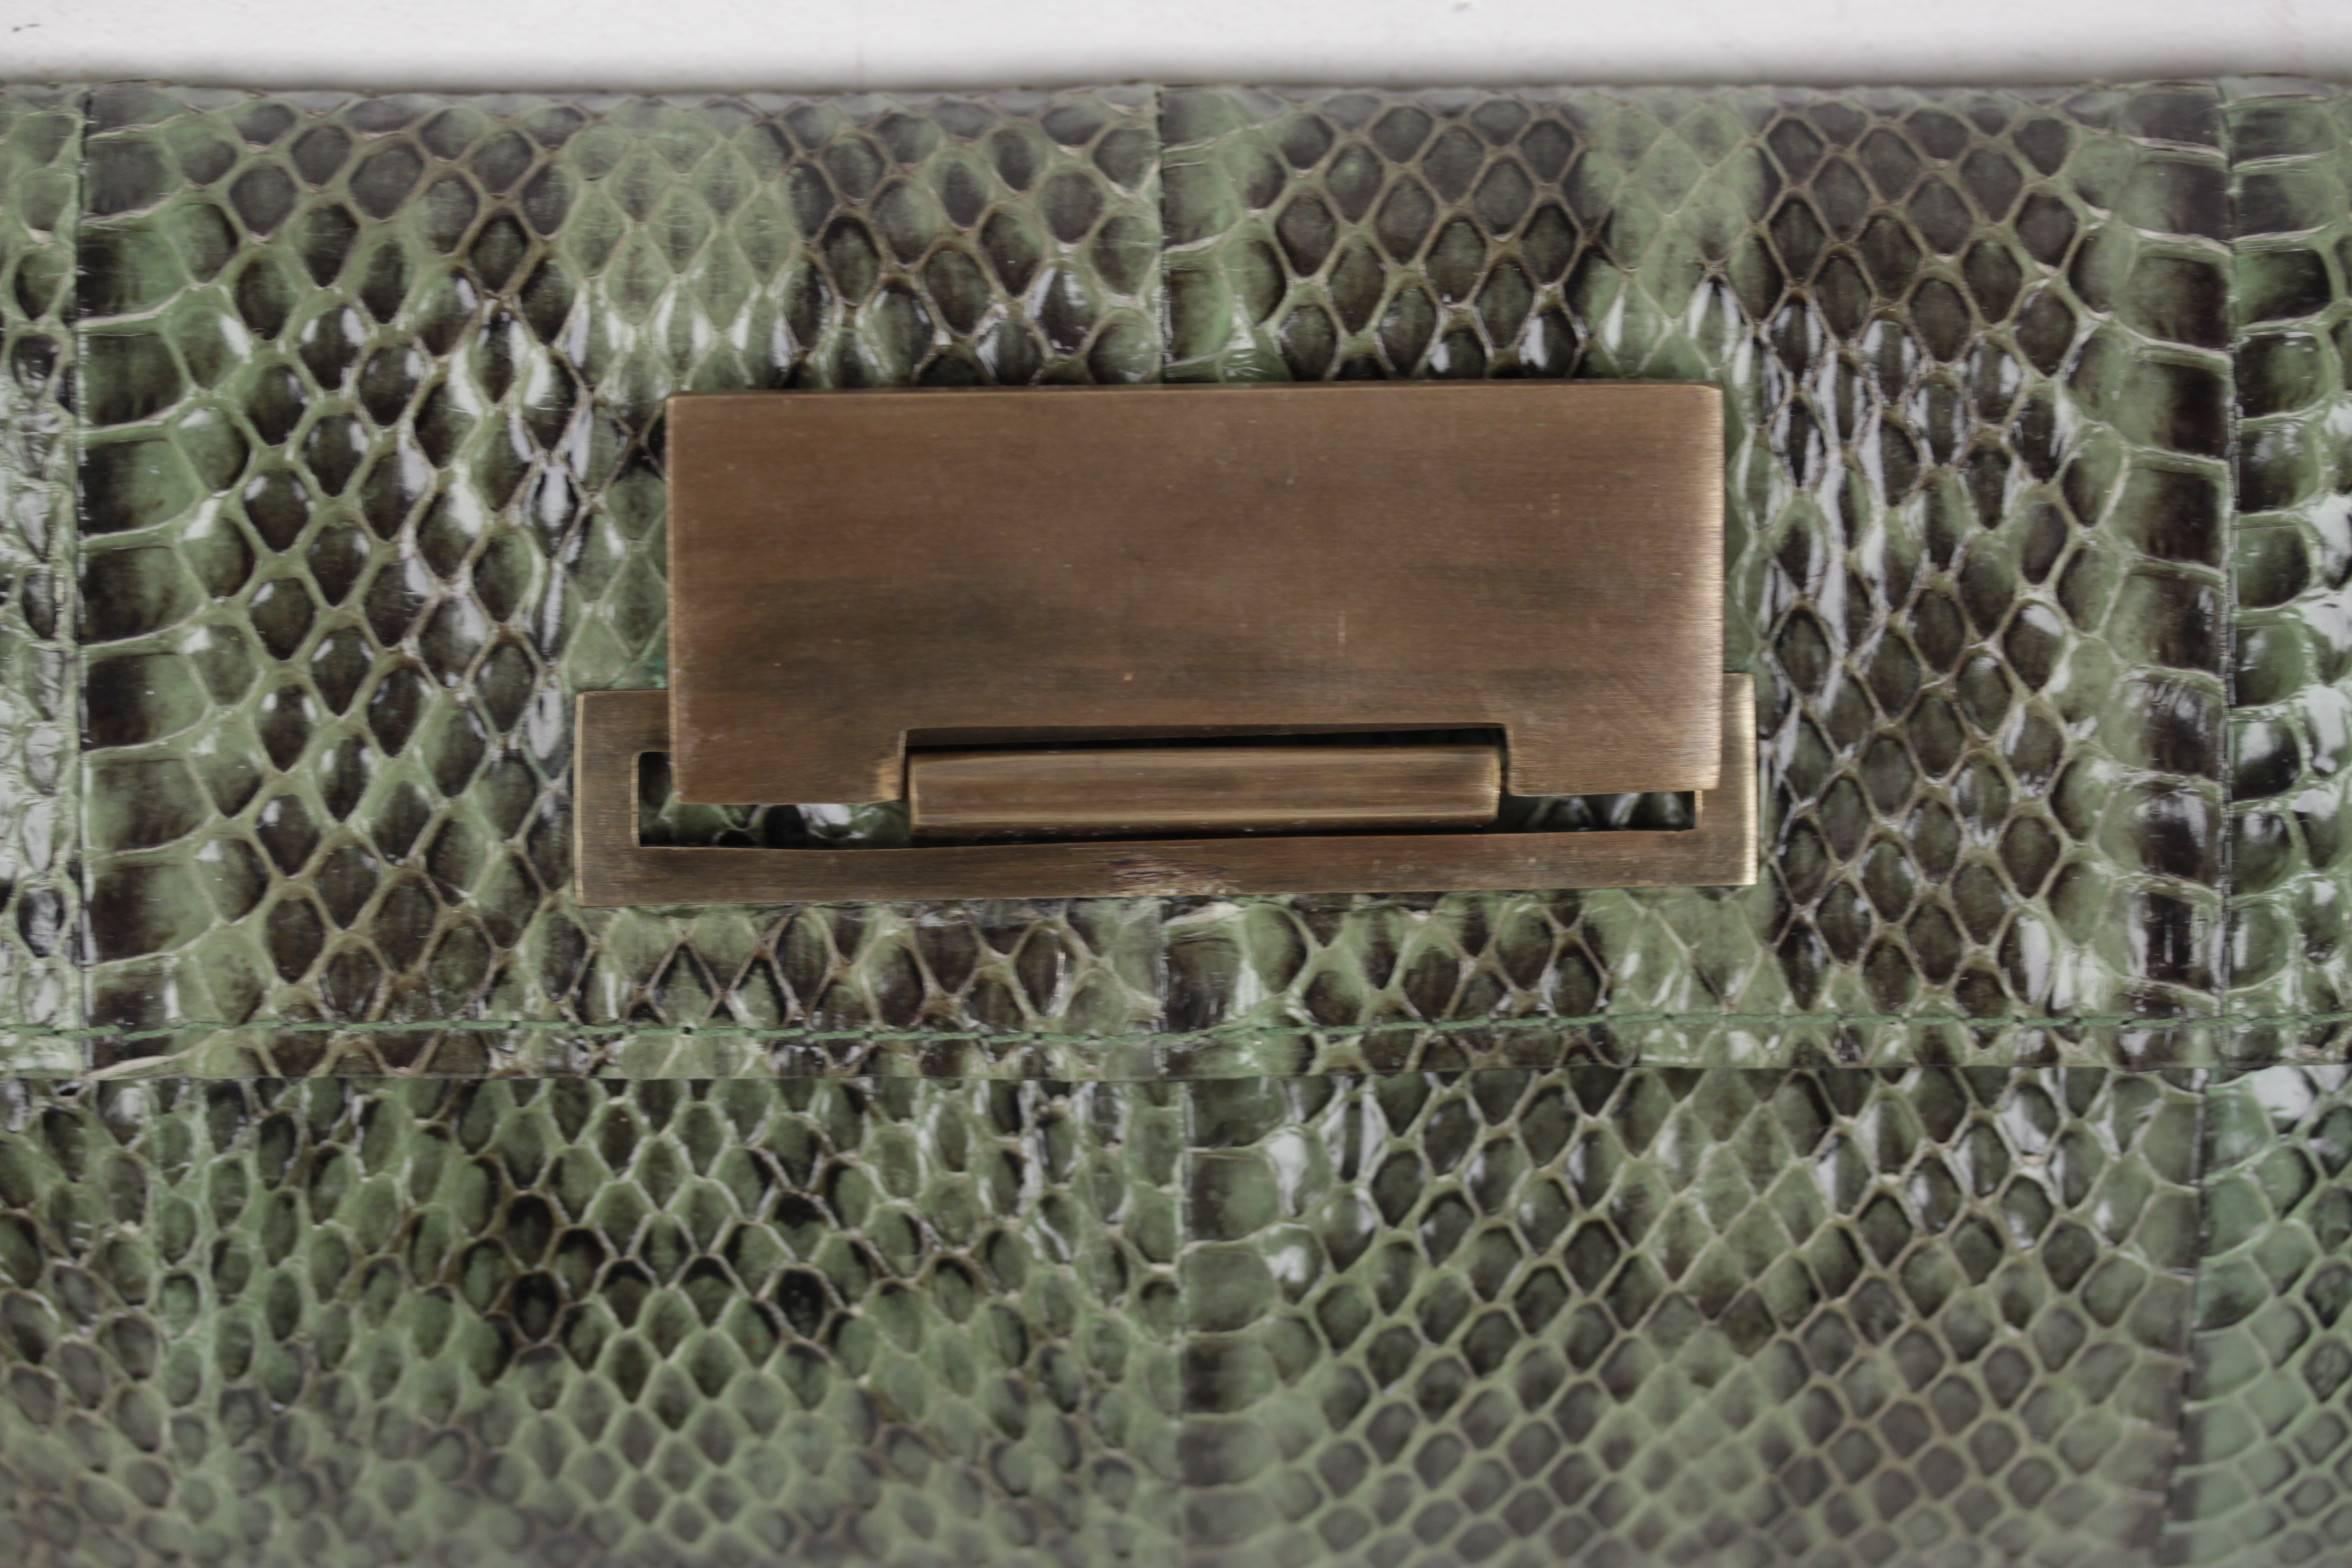  - Green python R & Y AUGOUSTI rectangular clutch

- Flao with clas closure on the front

- Green leather interior

- Brown fabric lining with designer signatures

- 1 side zip pockets inside

- Approx. measurements: 4 1/2 x 10 x 1 1/2